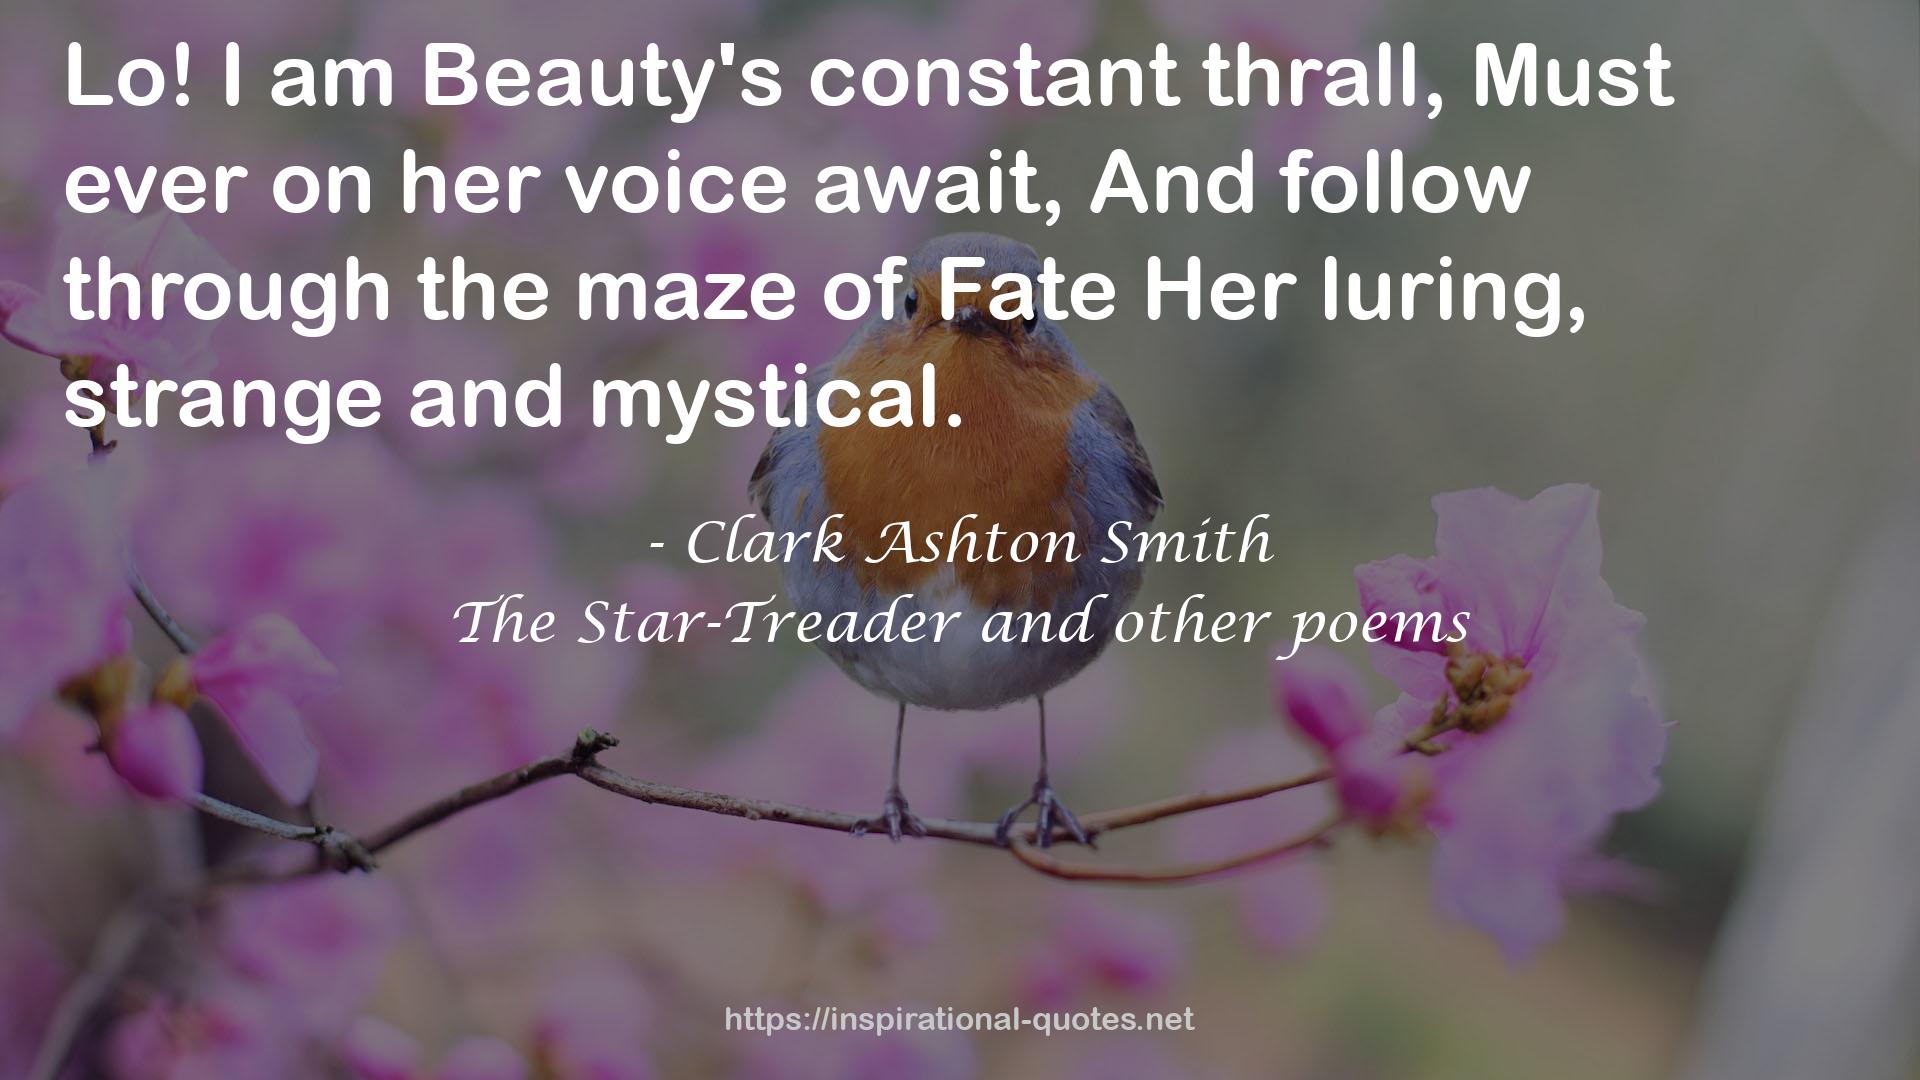 The Star-Treader and other poems QUOTES